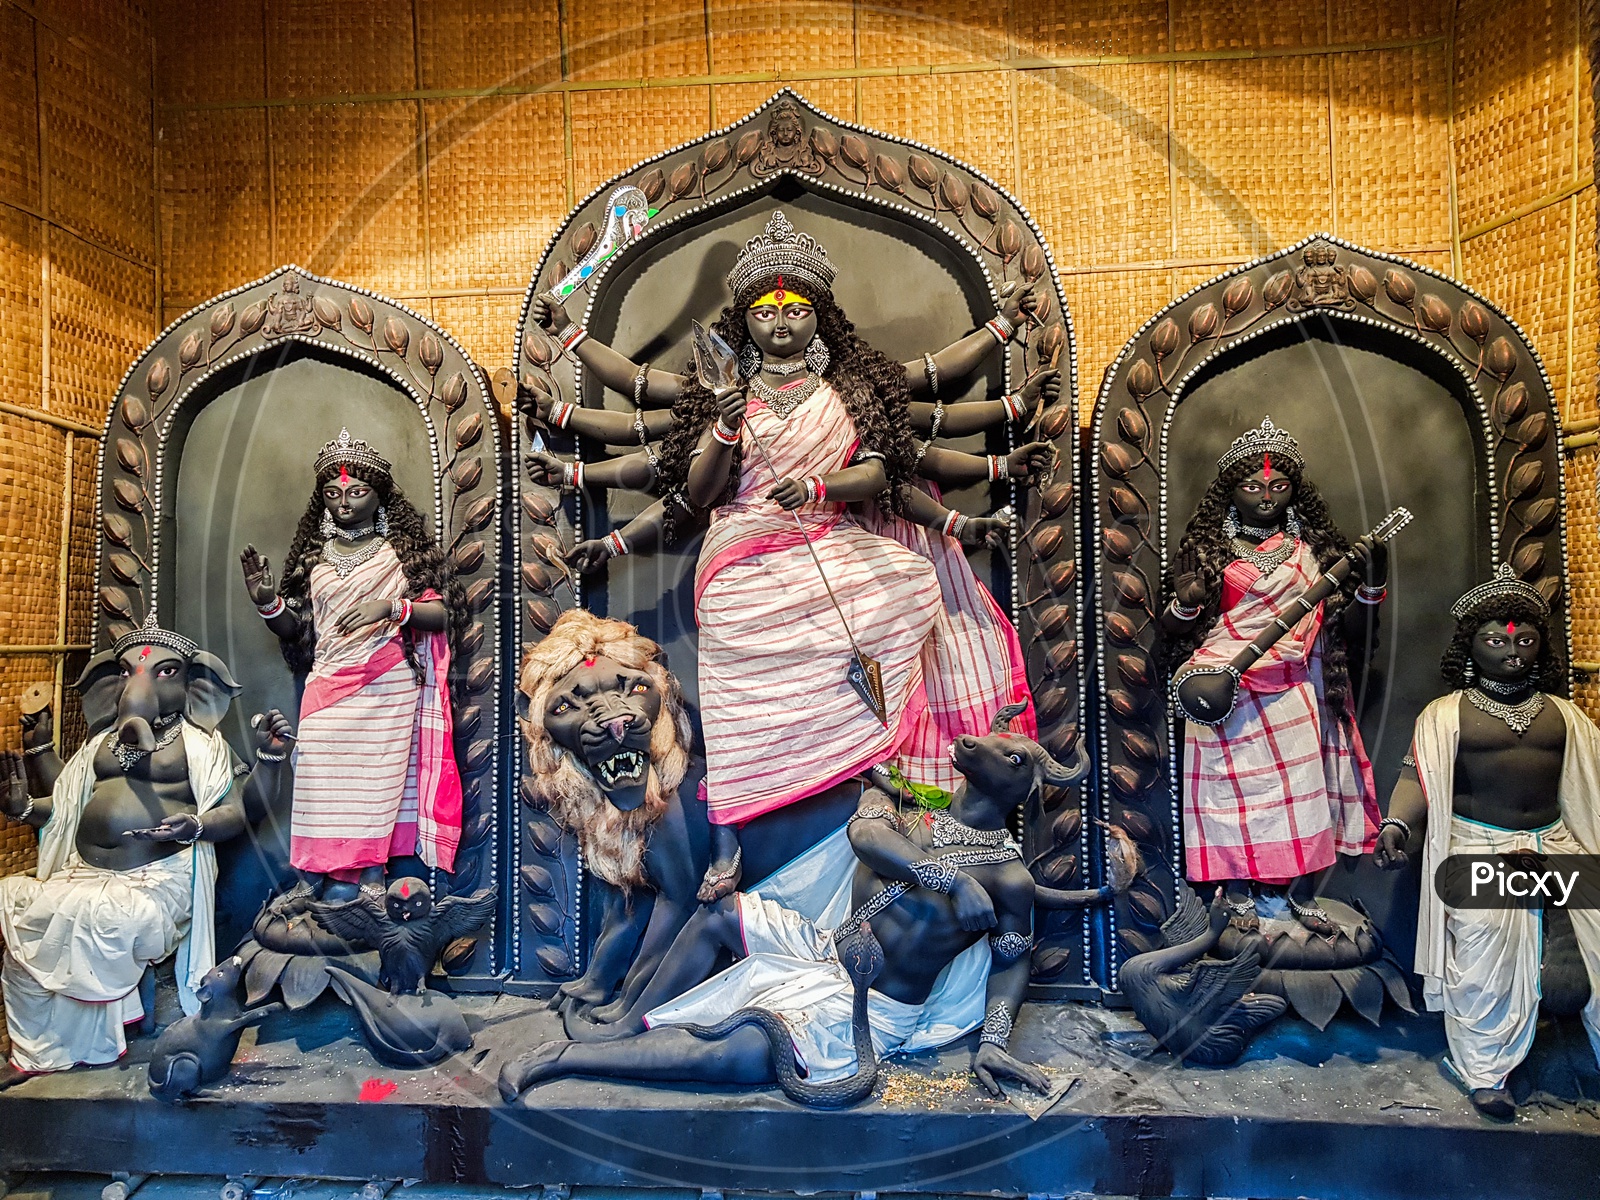 October 2018,Kolkata,West Bengal, India.Godess Durga Idol In A Pandal.Durga Puja Is The Most Important Worldwide Hindu Festival For Bengali Community